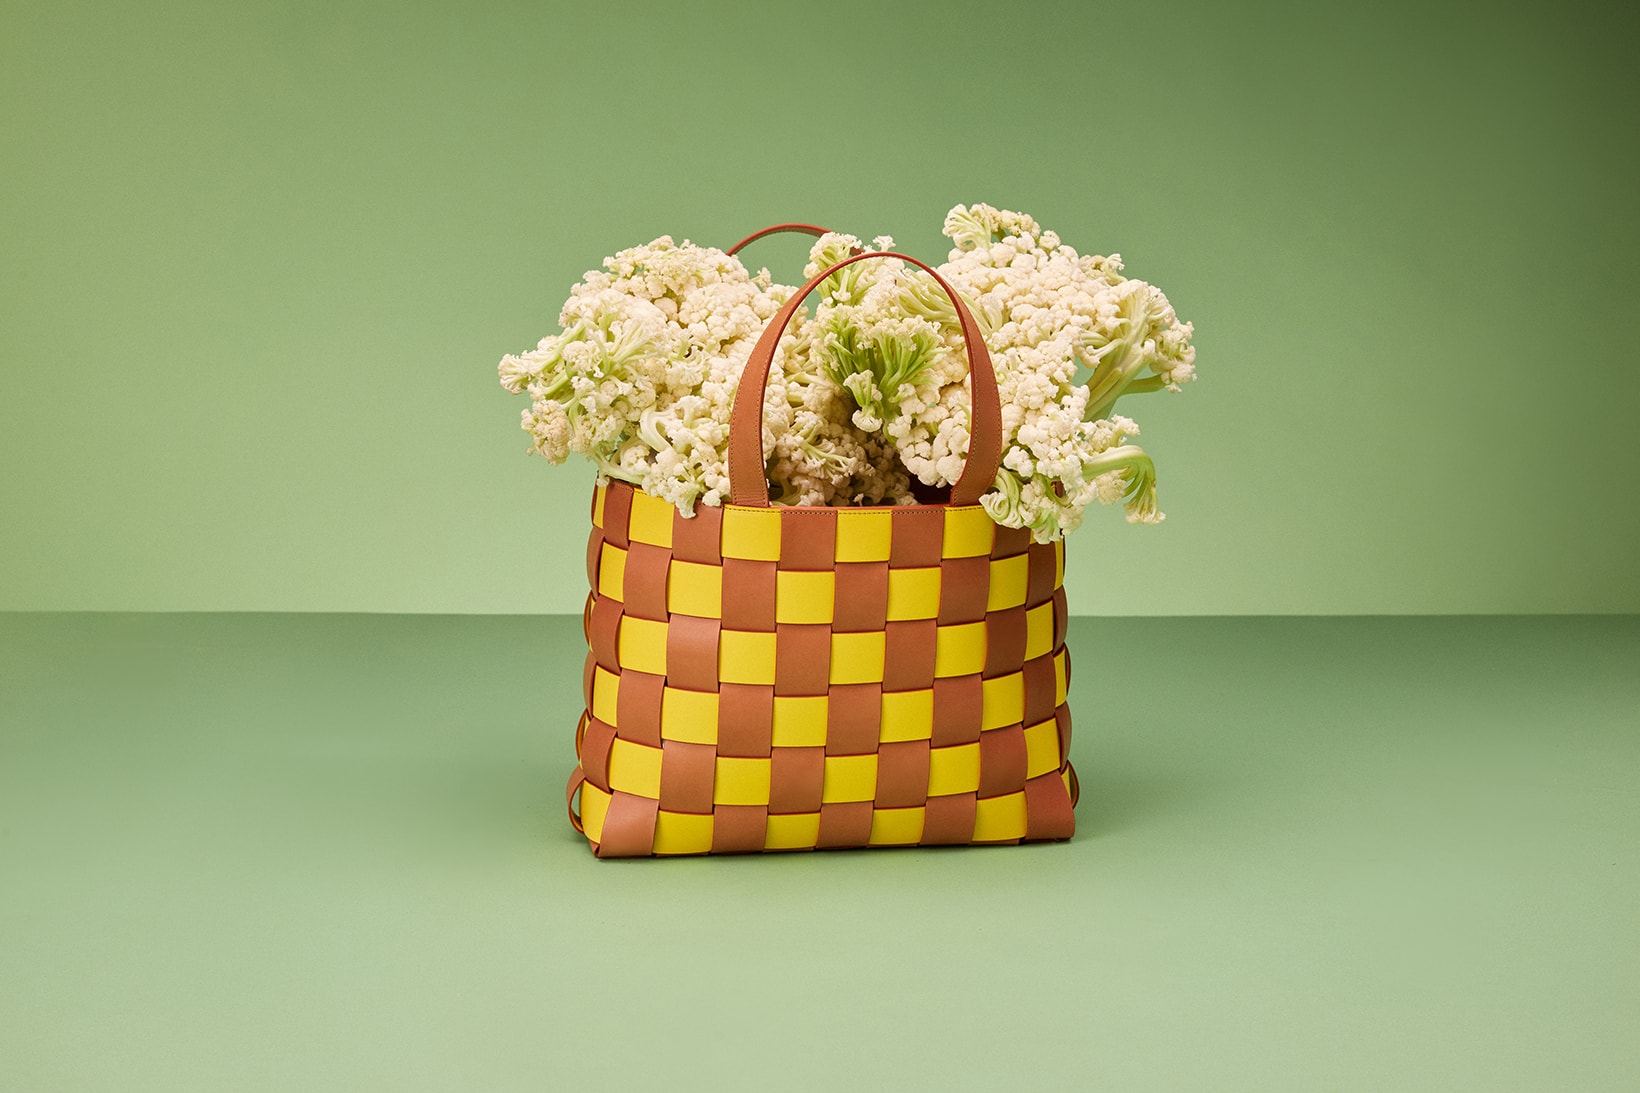 Mansur Gavriel Upcycled Woven Totes Bags Limited Edition